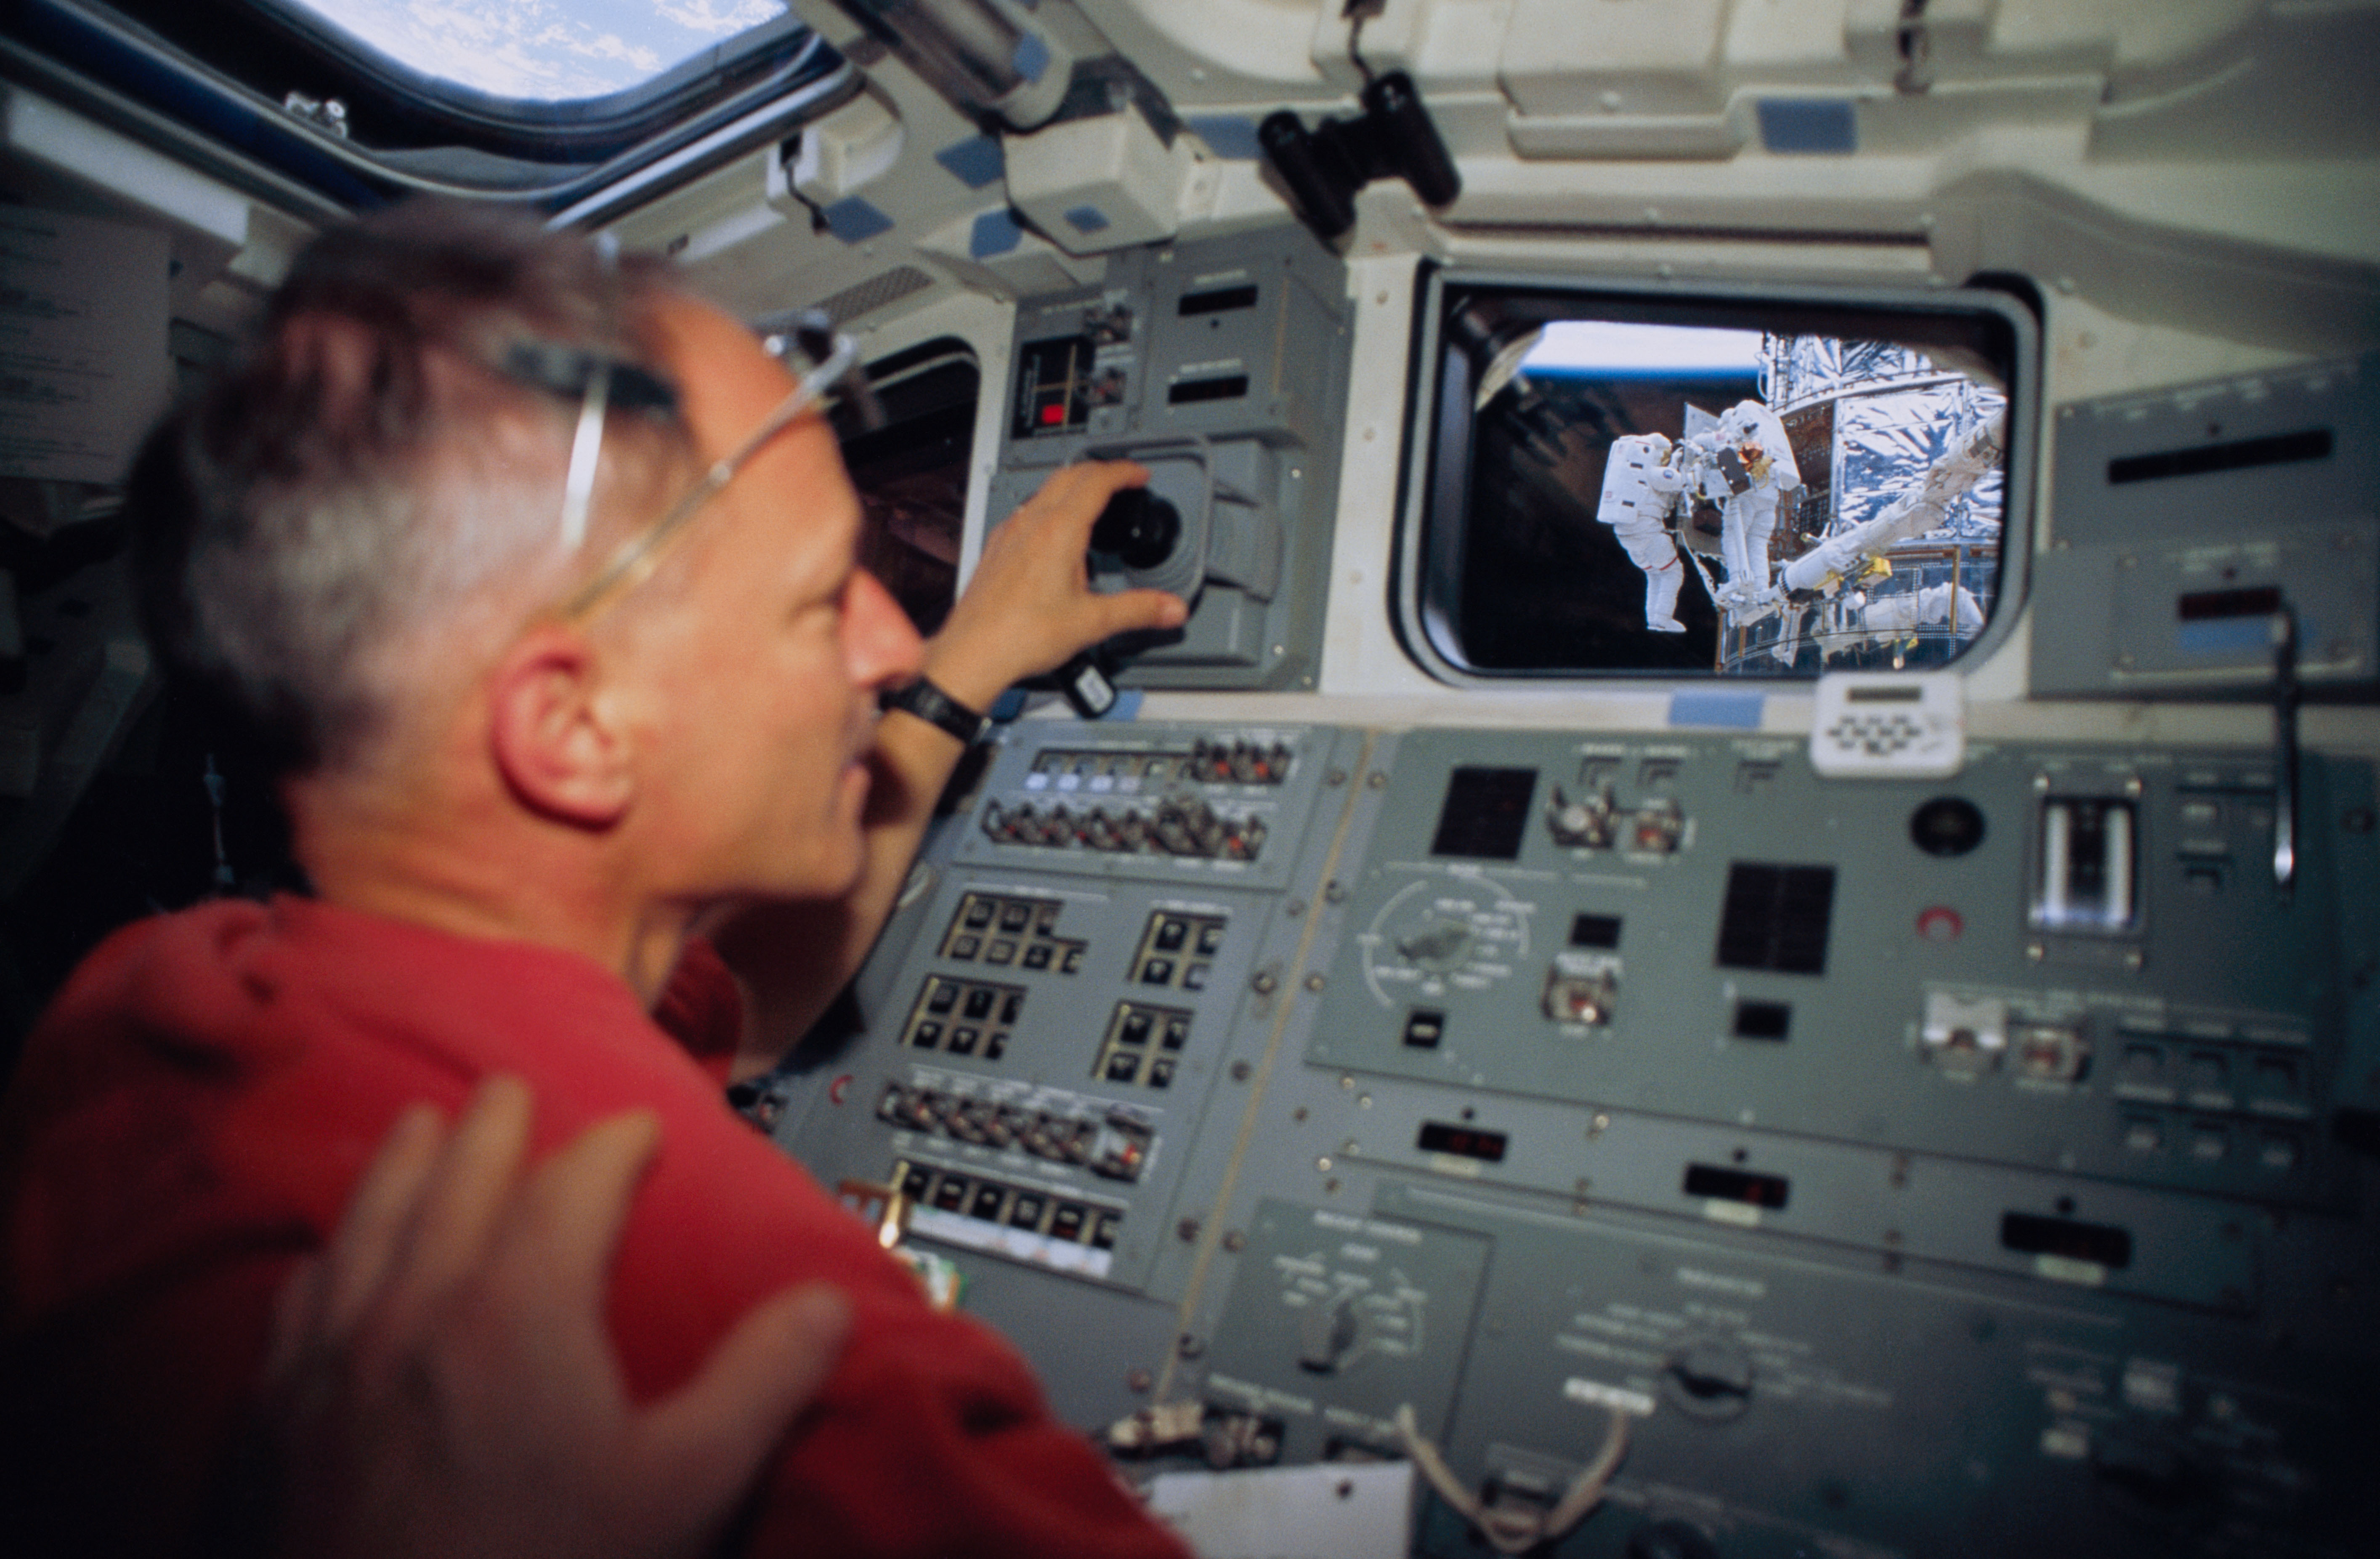 European Space Agency astronaut Claude Nicollier operates the shuttle’s Remote Manipulator System (RMS) or robotic arm in support of the spacewalks